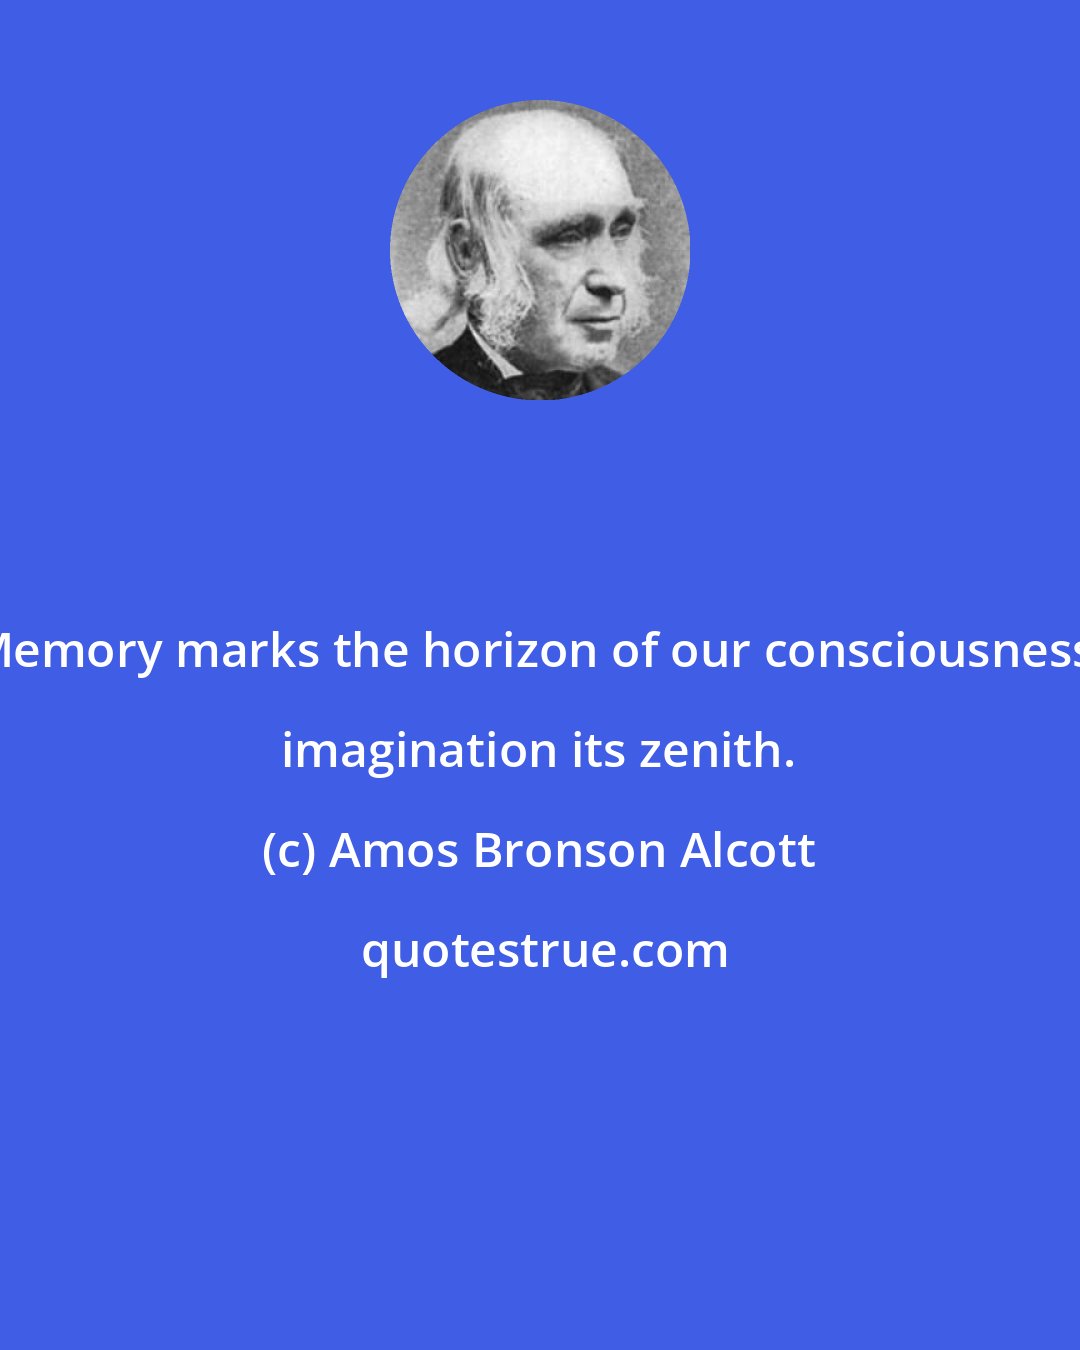 Amos Bronson Alcott: Memory marks the horizon of our consciousness, imagination its zenith.